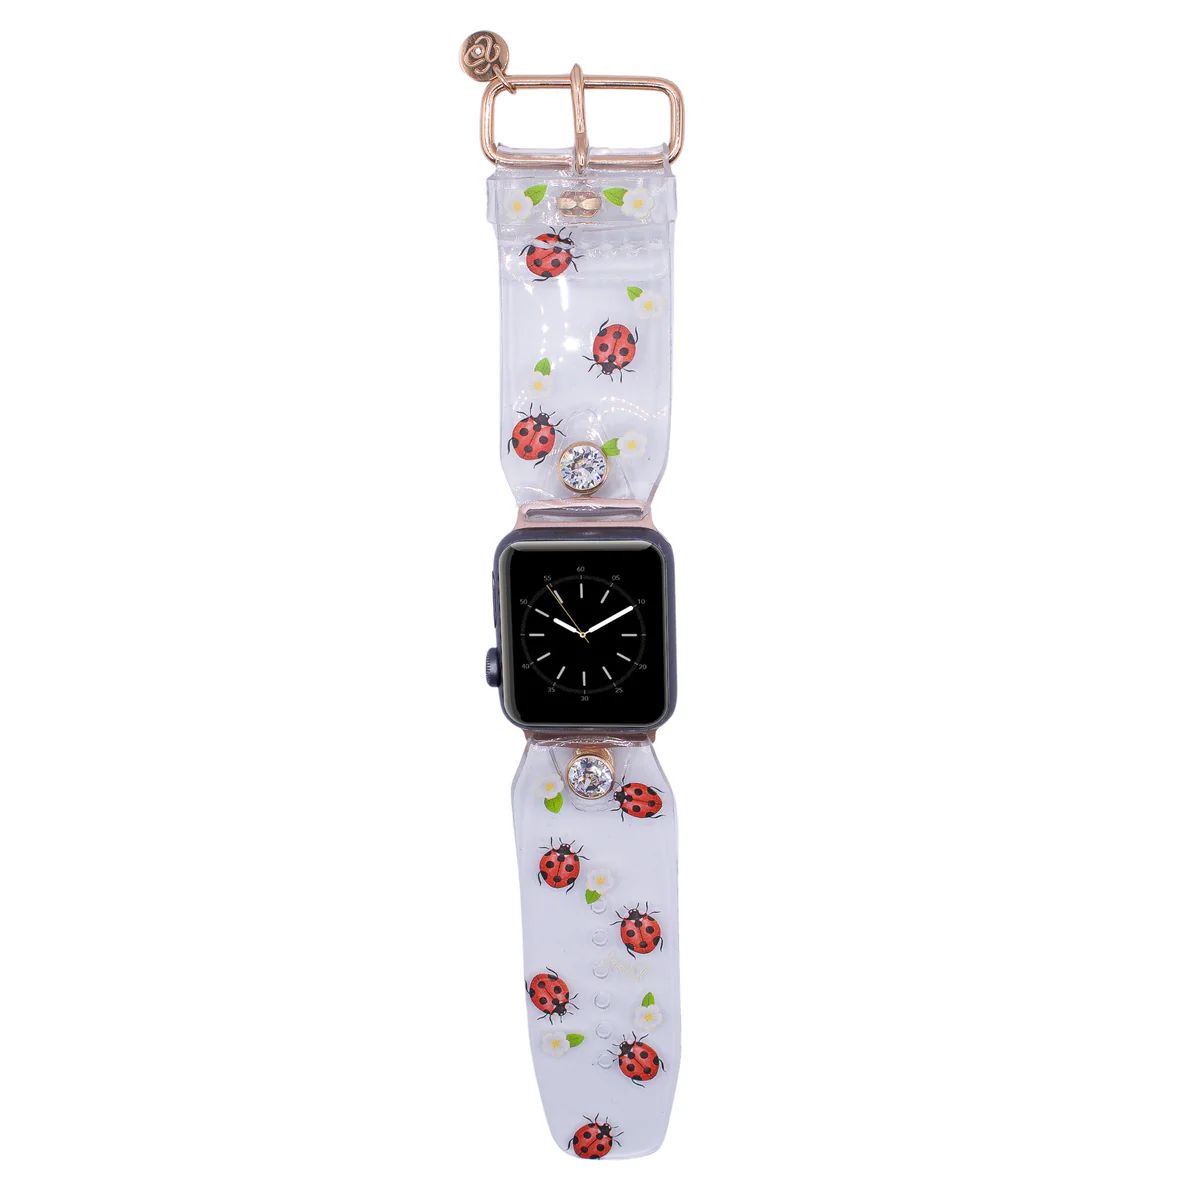 Limited Edition - "Summer Lady" Waterproof Watchband | Spark*l